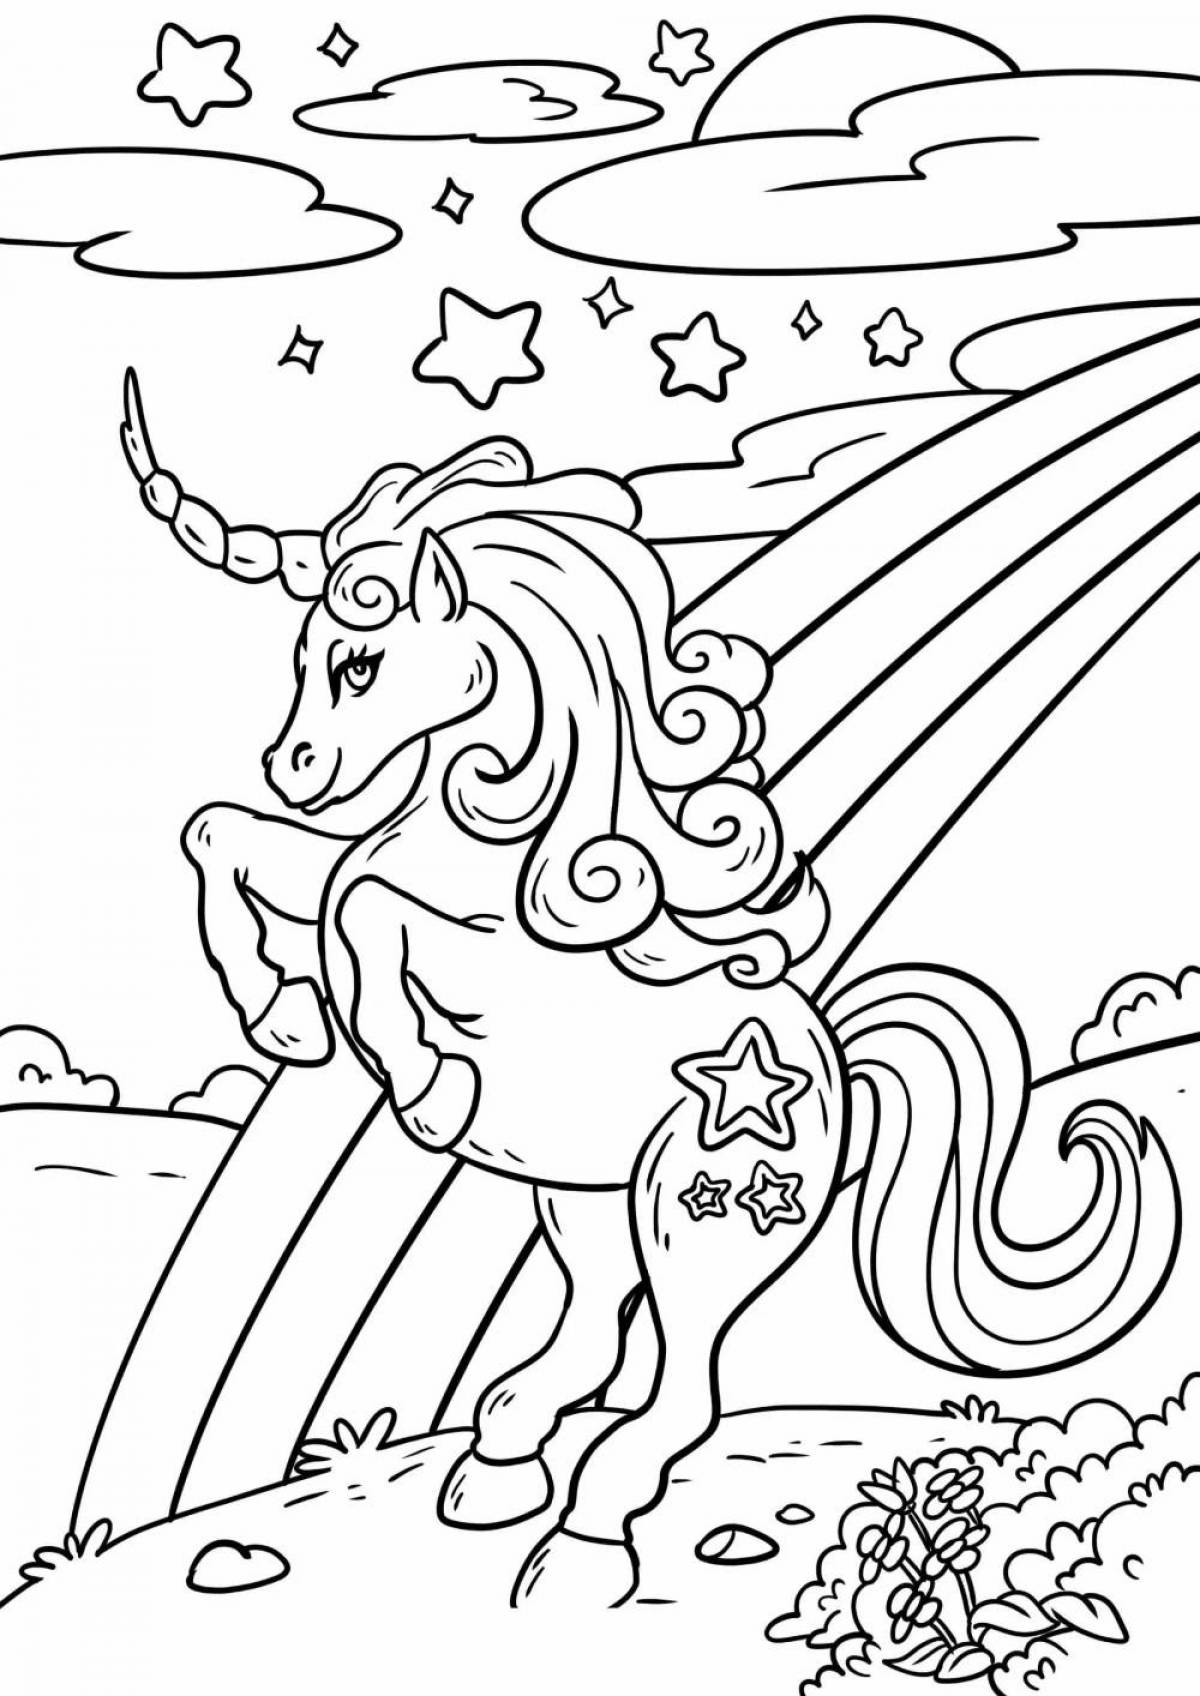 A fun unicorn coloring book for kids 6-7 years old